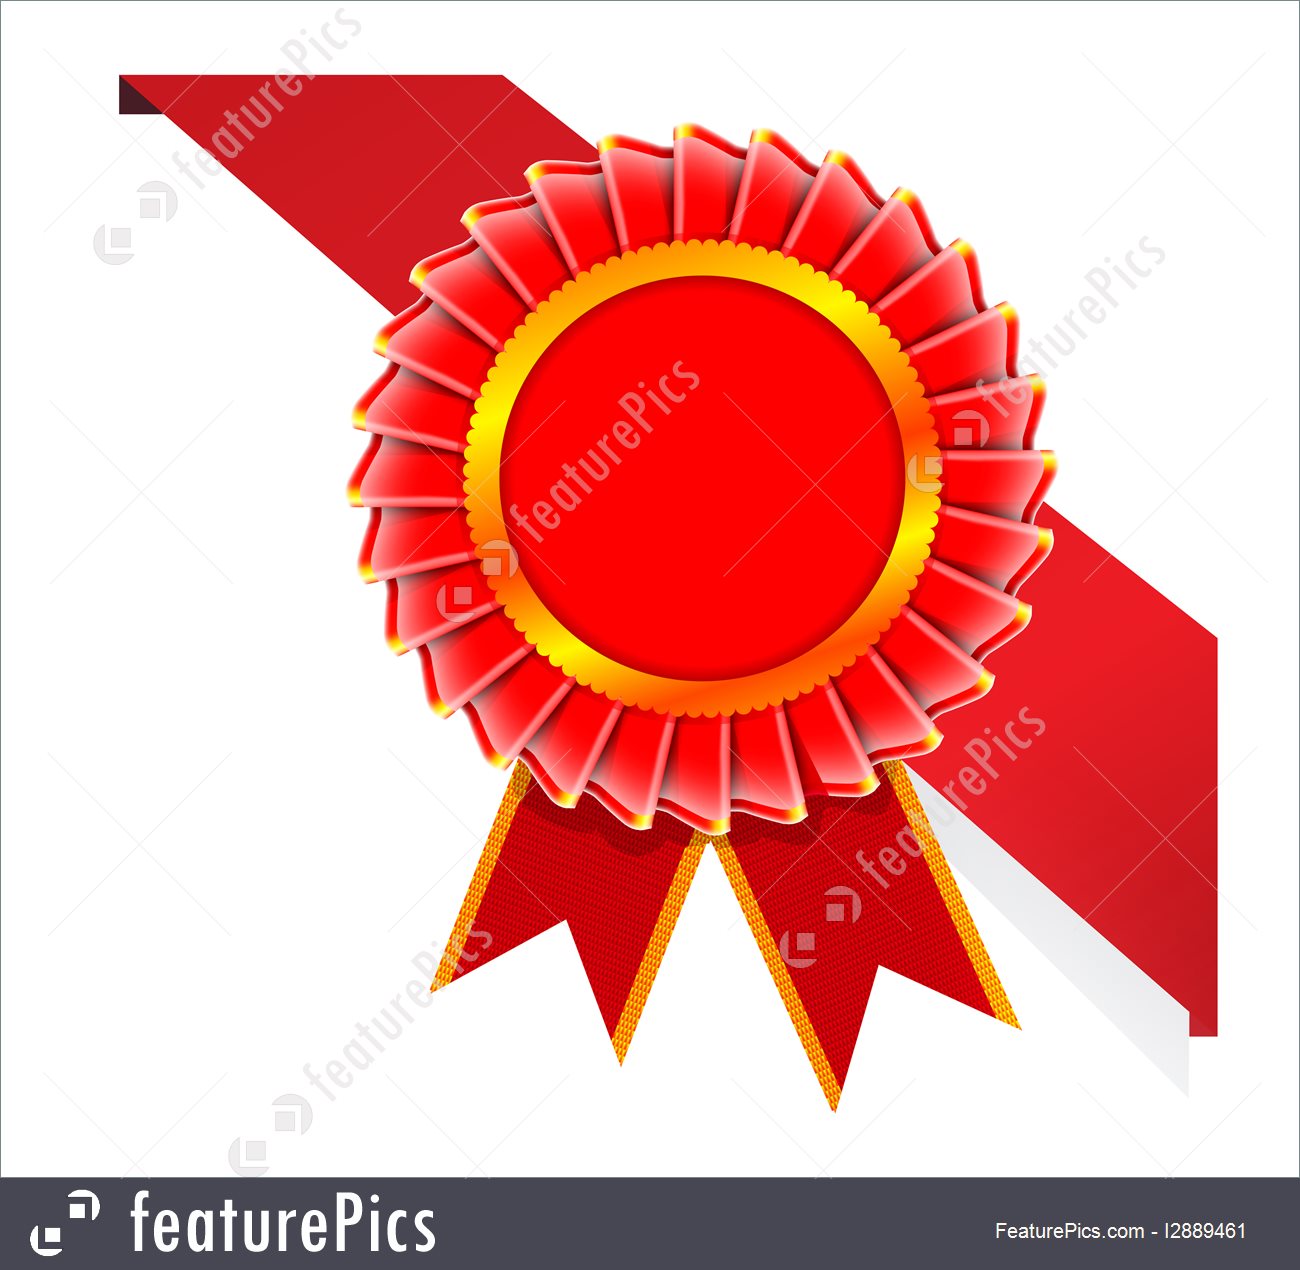 Emblems And Symbols: Vector Corner Ribbon And Quality Certificate 